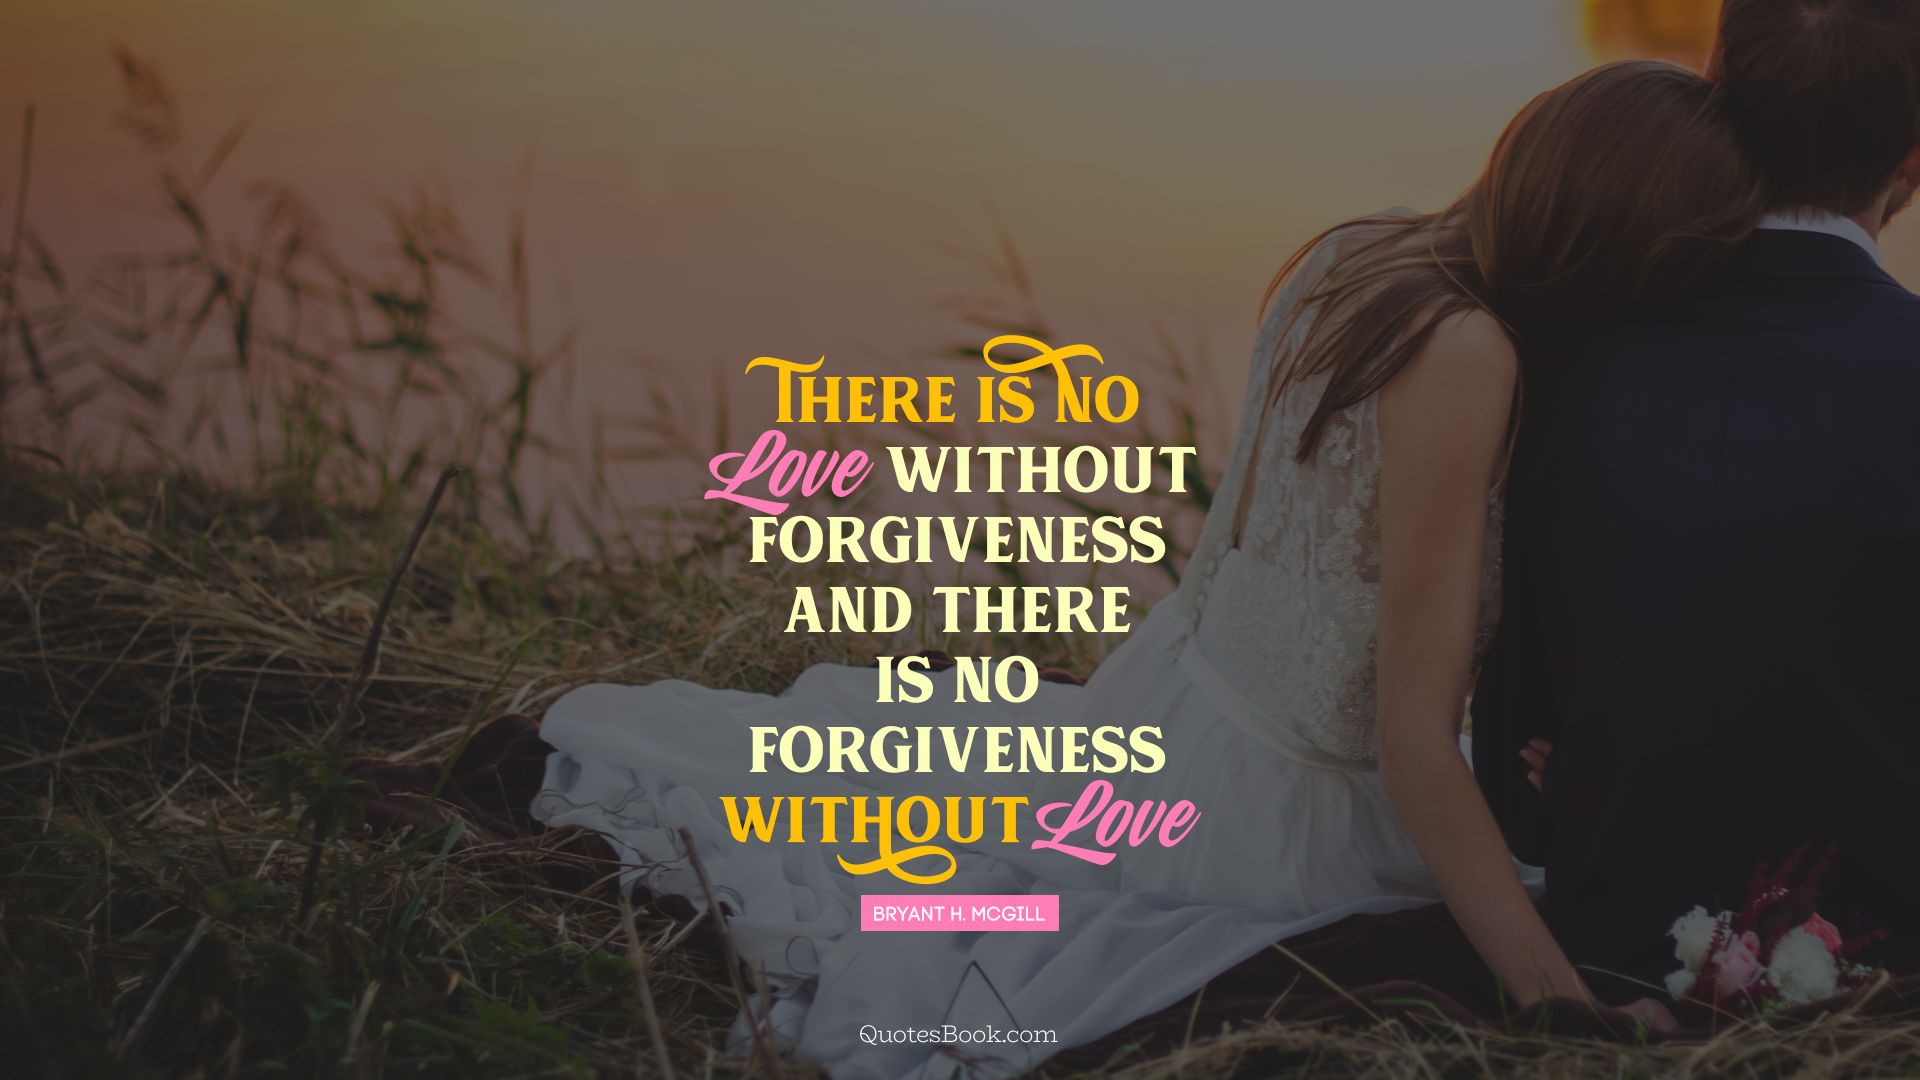 There is no love without forgiveness, and there is no forgiveness without love. - Quote by Bryant H. McGill